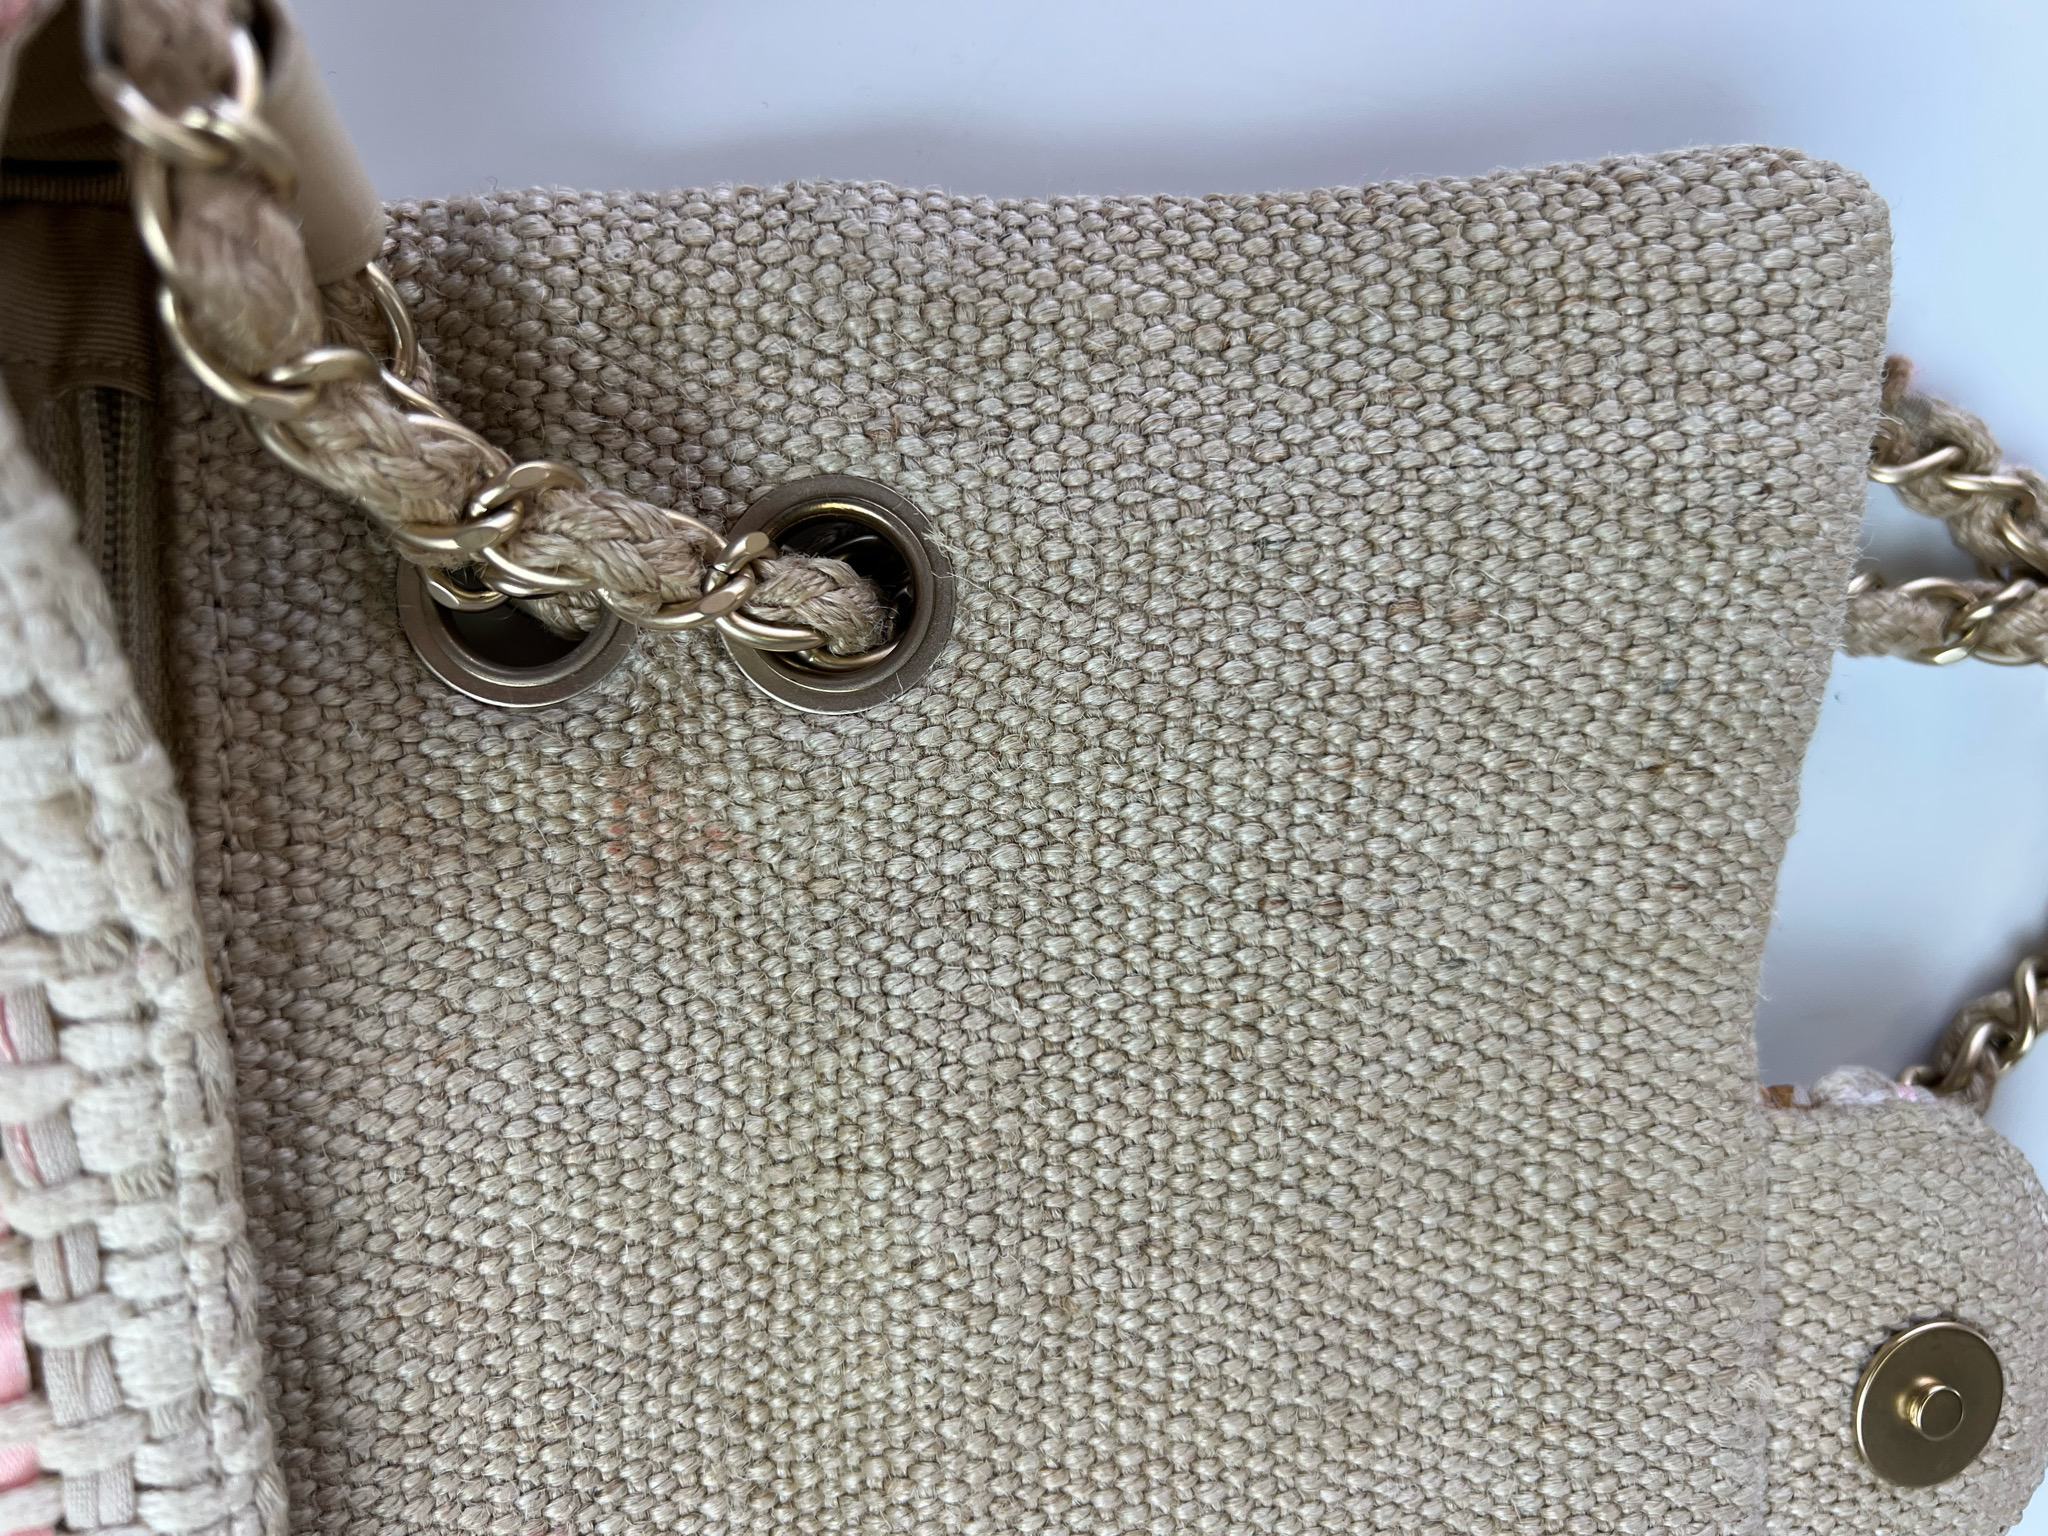 Chanel Flap, Knit Woven, Beige and Pink with Gold Hardware